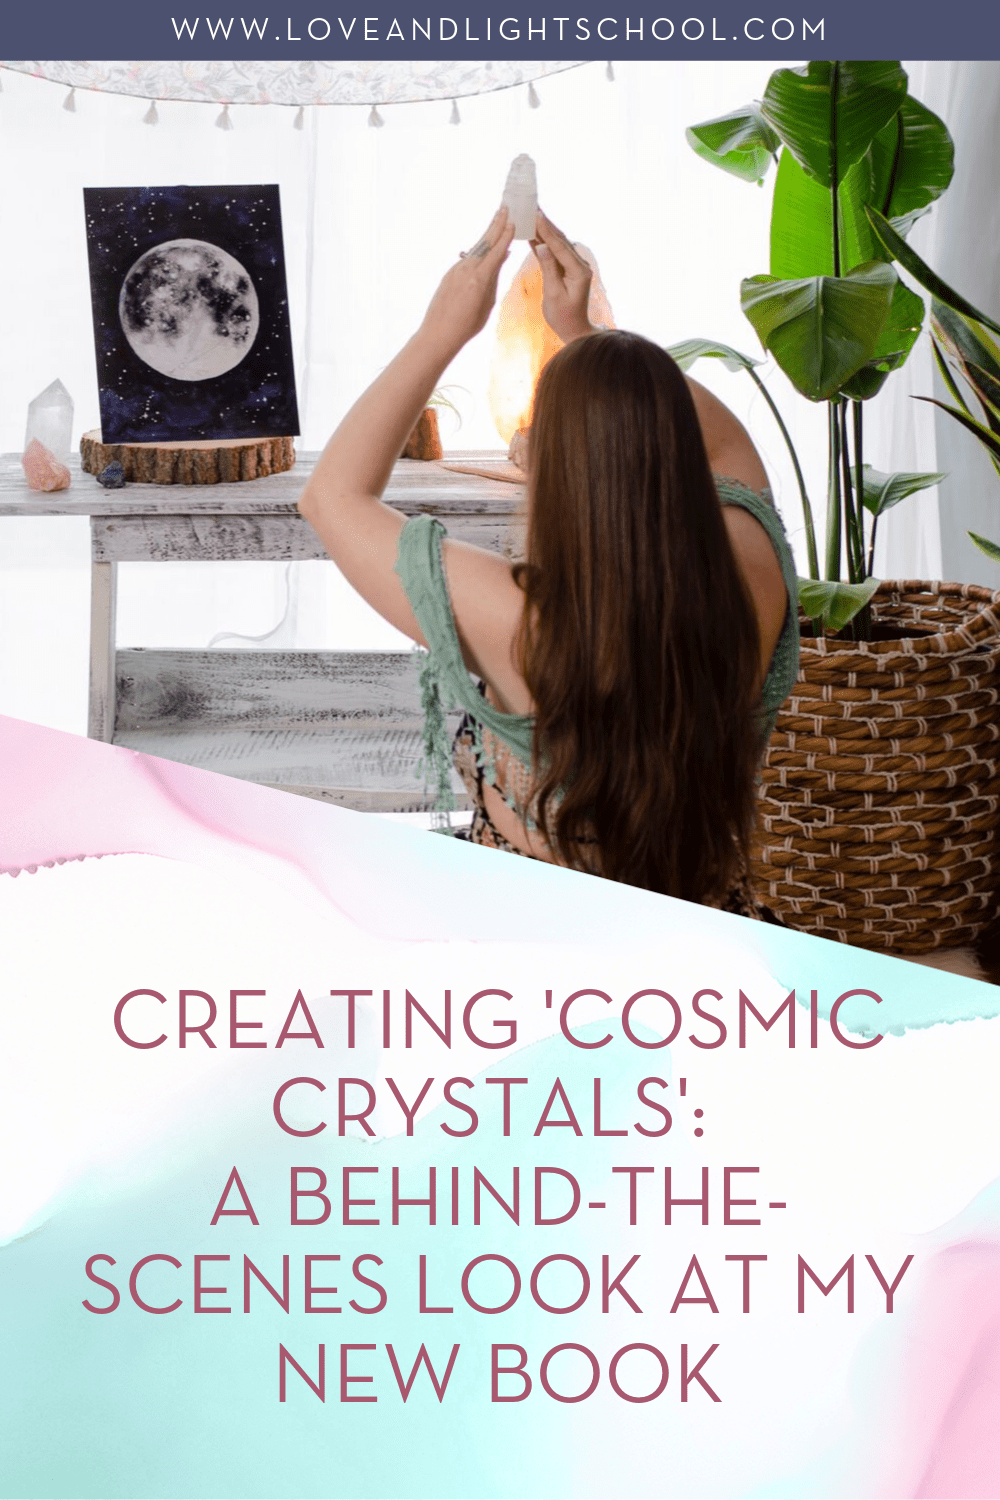 Creating 'Cosmic Crystals': A Behind-the-Scenes Look at My New Book